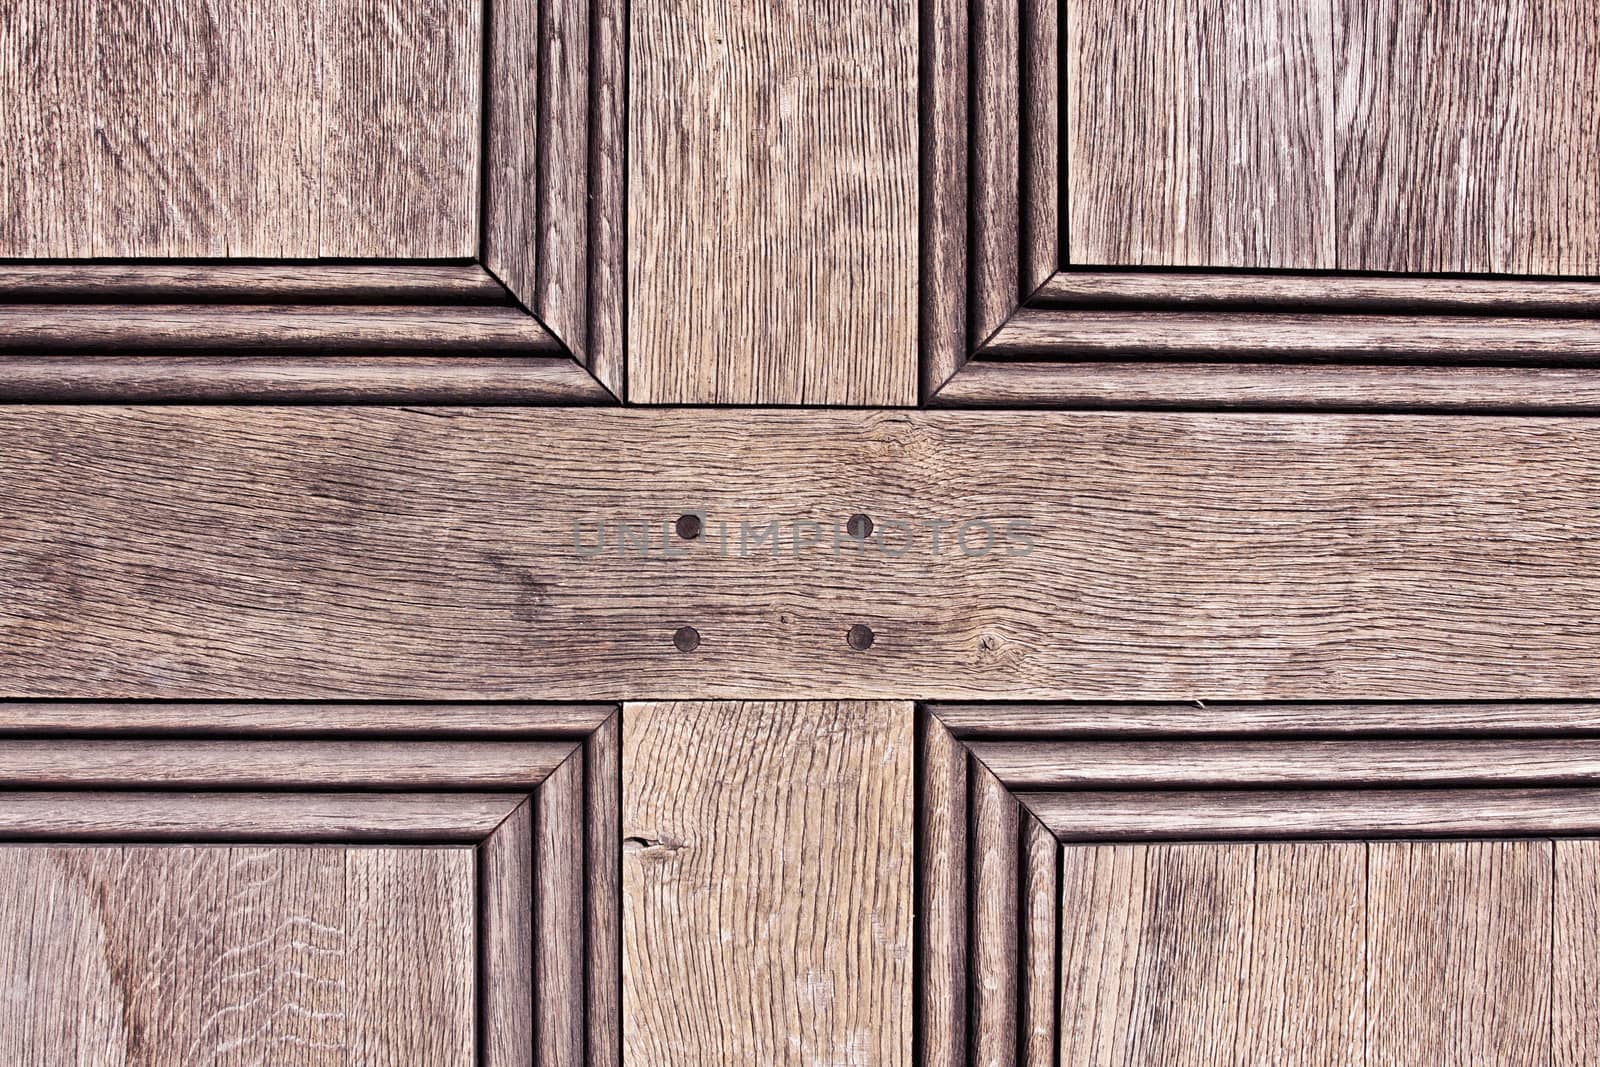 Close up of the panels of an old wooden door